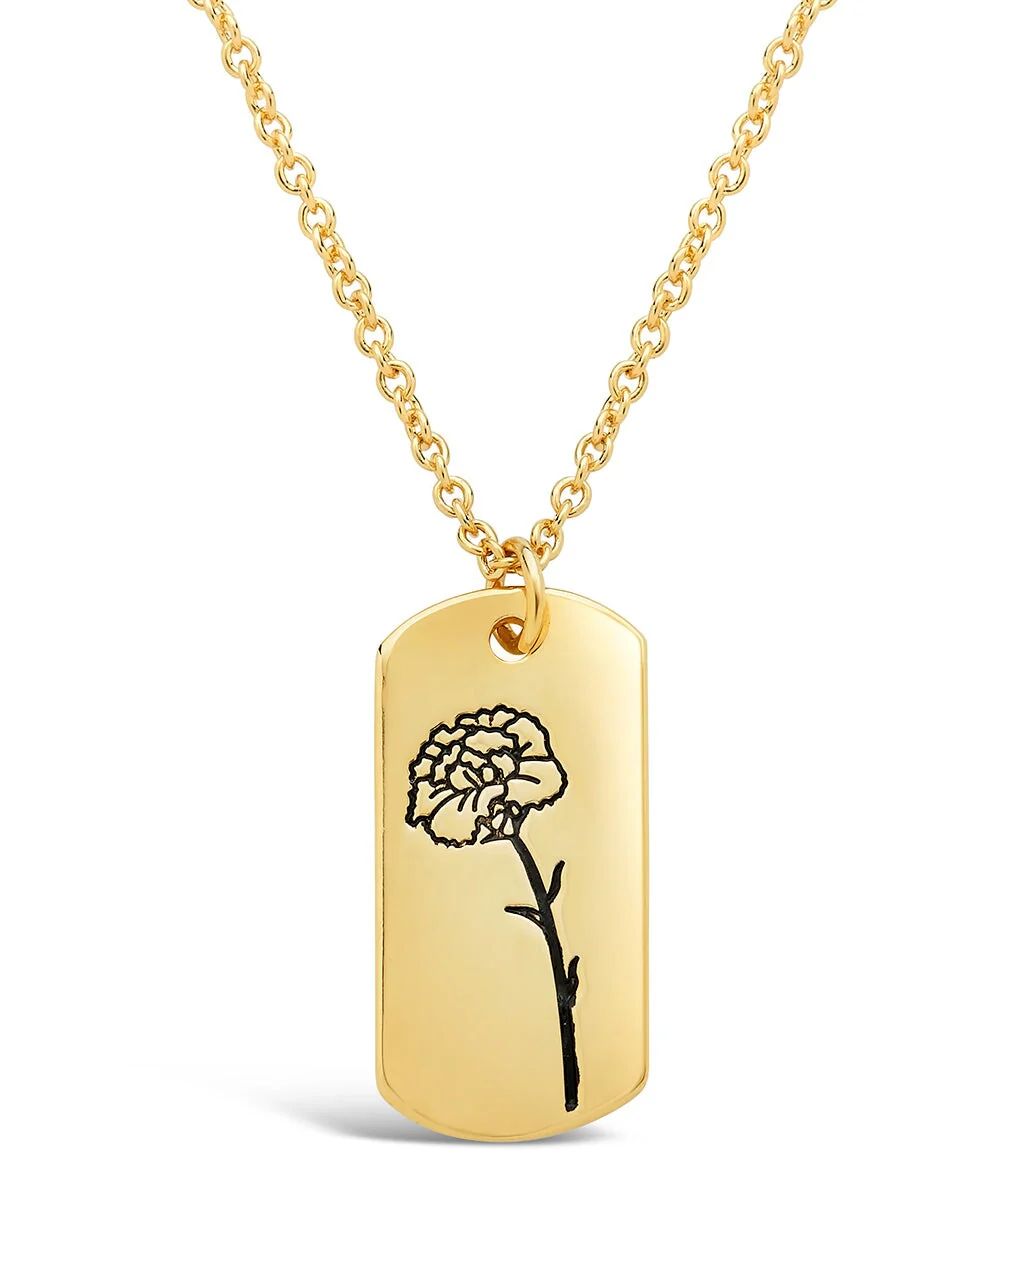 Personalized Silver & Gold Birth Flower Pendant Necklace - Sterling Forever | Sterling Forever